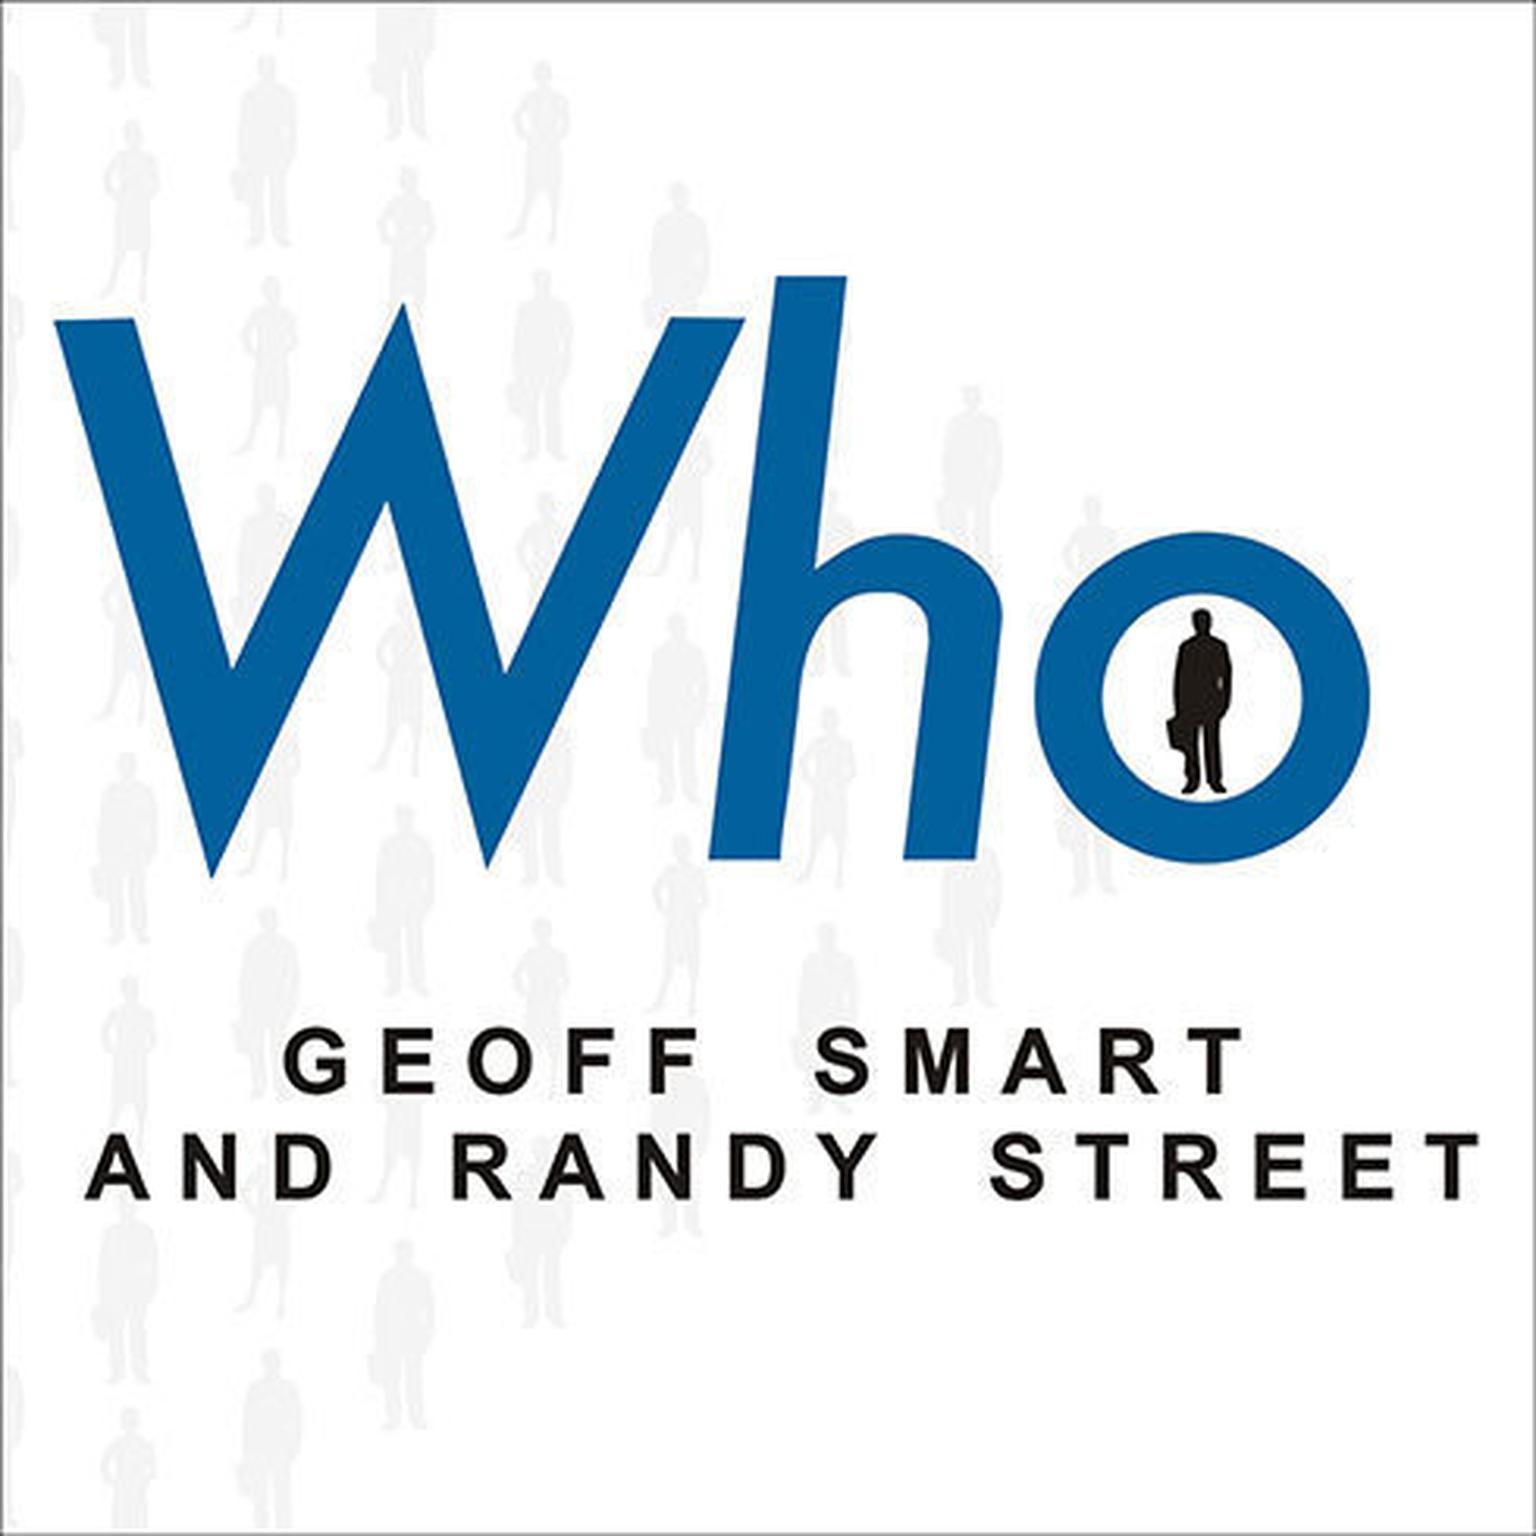 Who: The A Method for Hiring Audiobook, by Geoff Smart